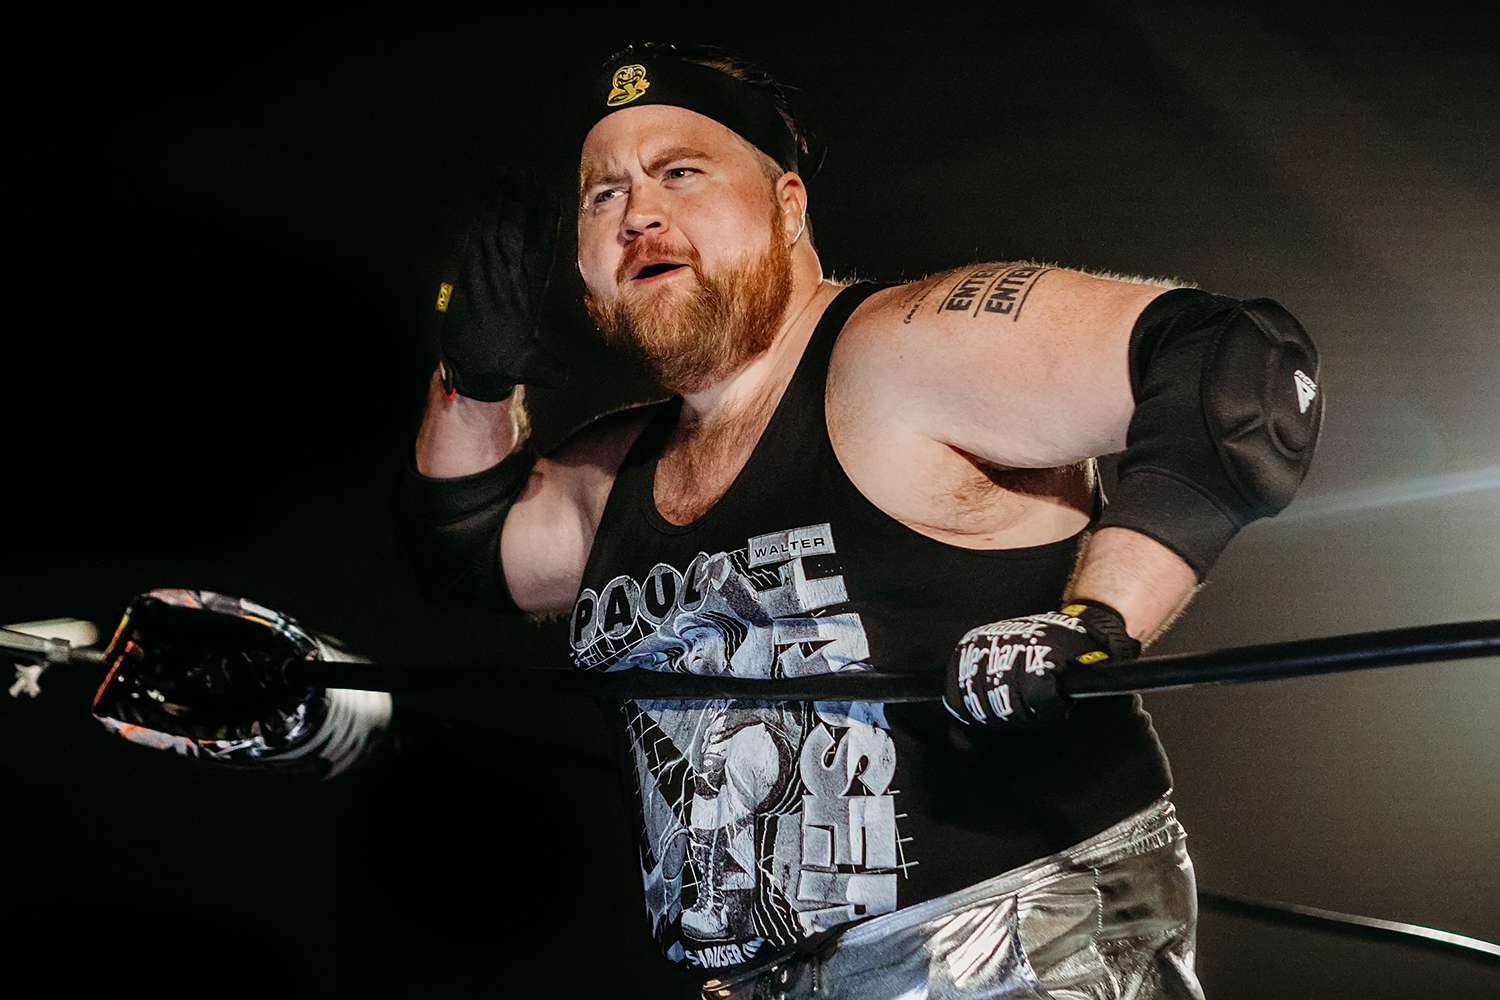 Why Actor Paul Walter Hauser Is Joining Major League Wrestling: 'I Got Bit by the Bug' (Exclusive)